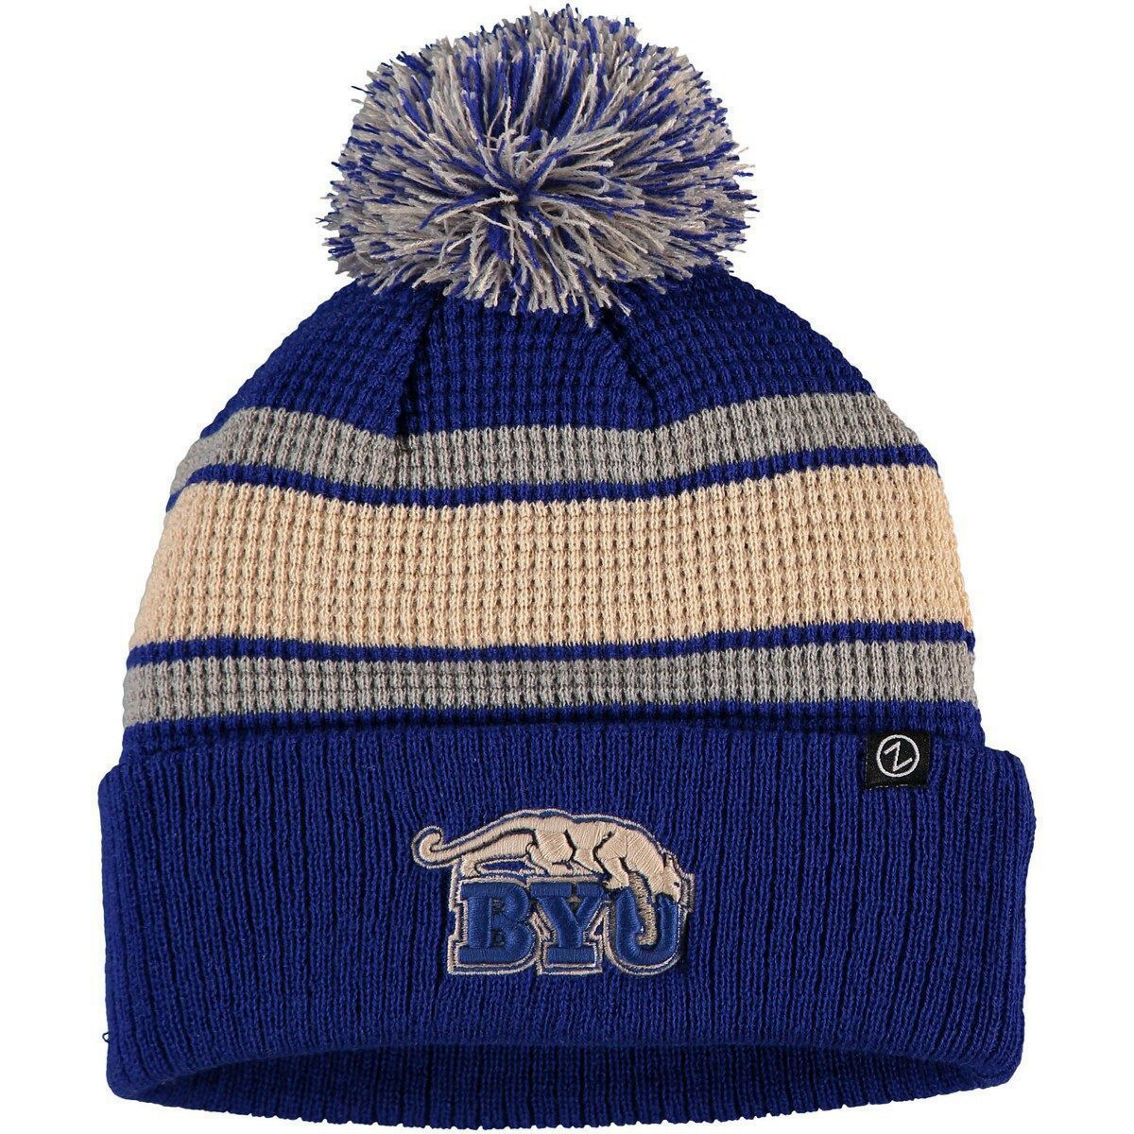 Men's Zephyr Navy BYU Cougars Lincoln Cuffed Pom Knit Hat - Image 1 of 2